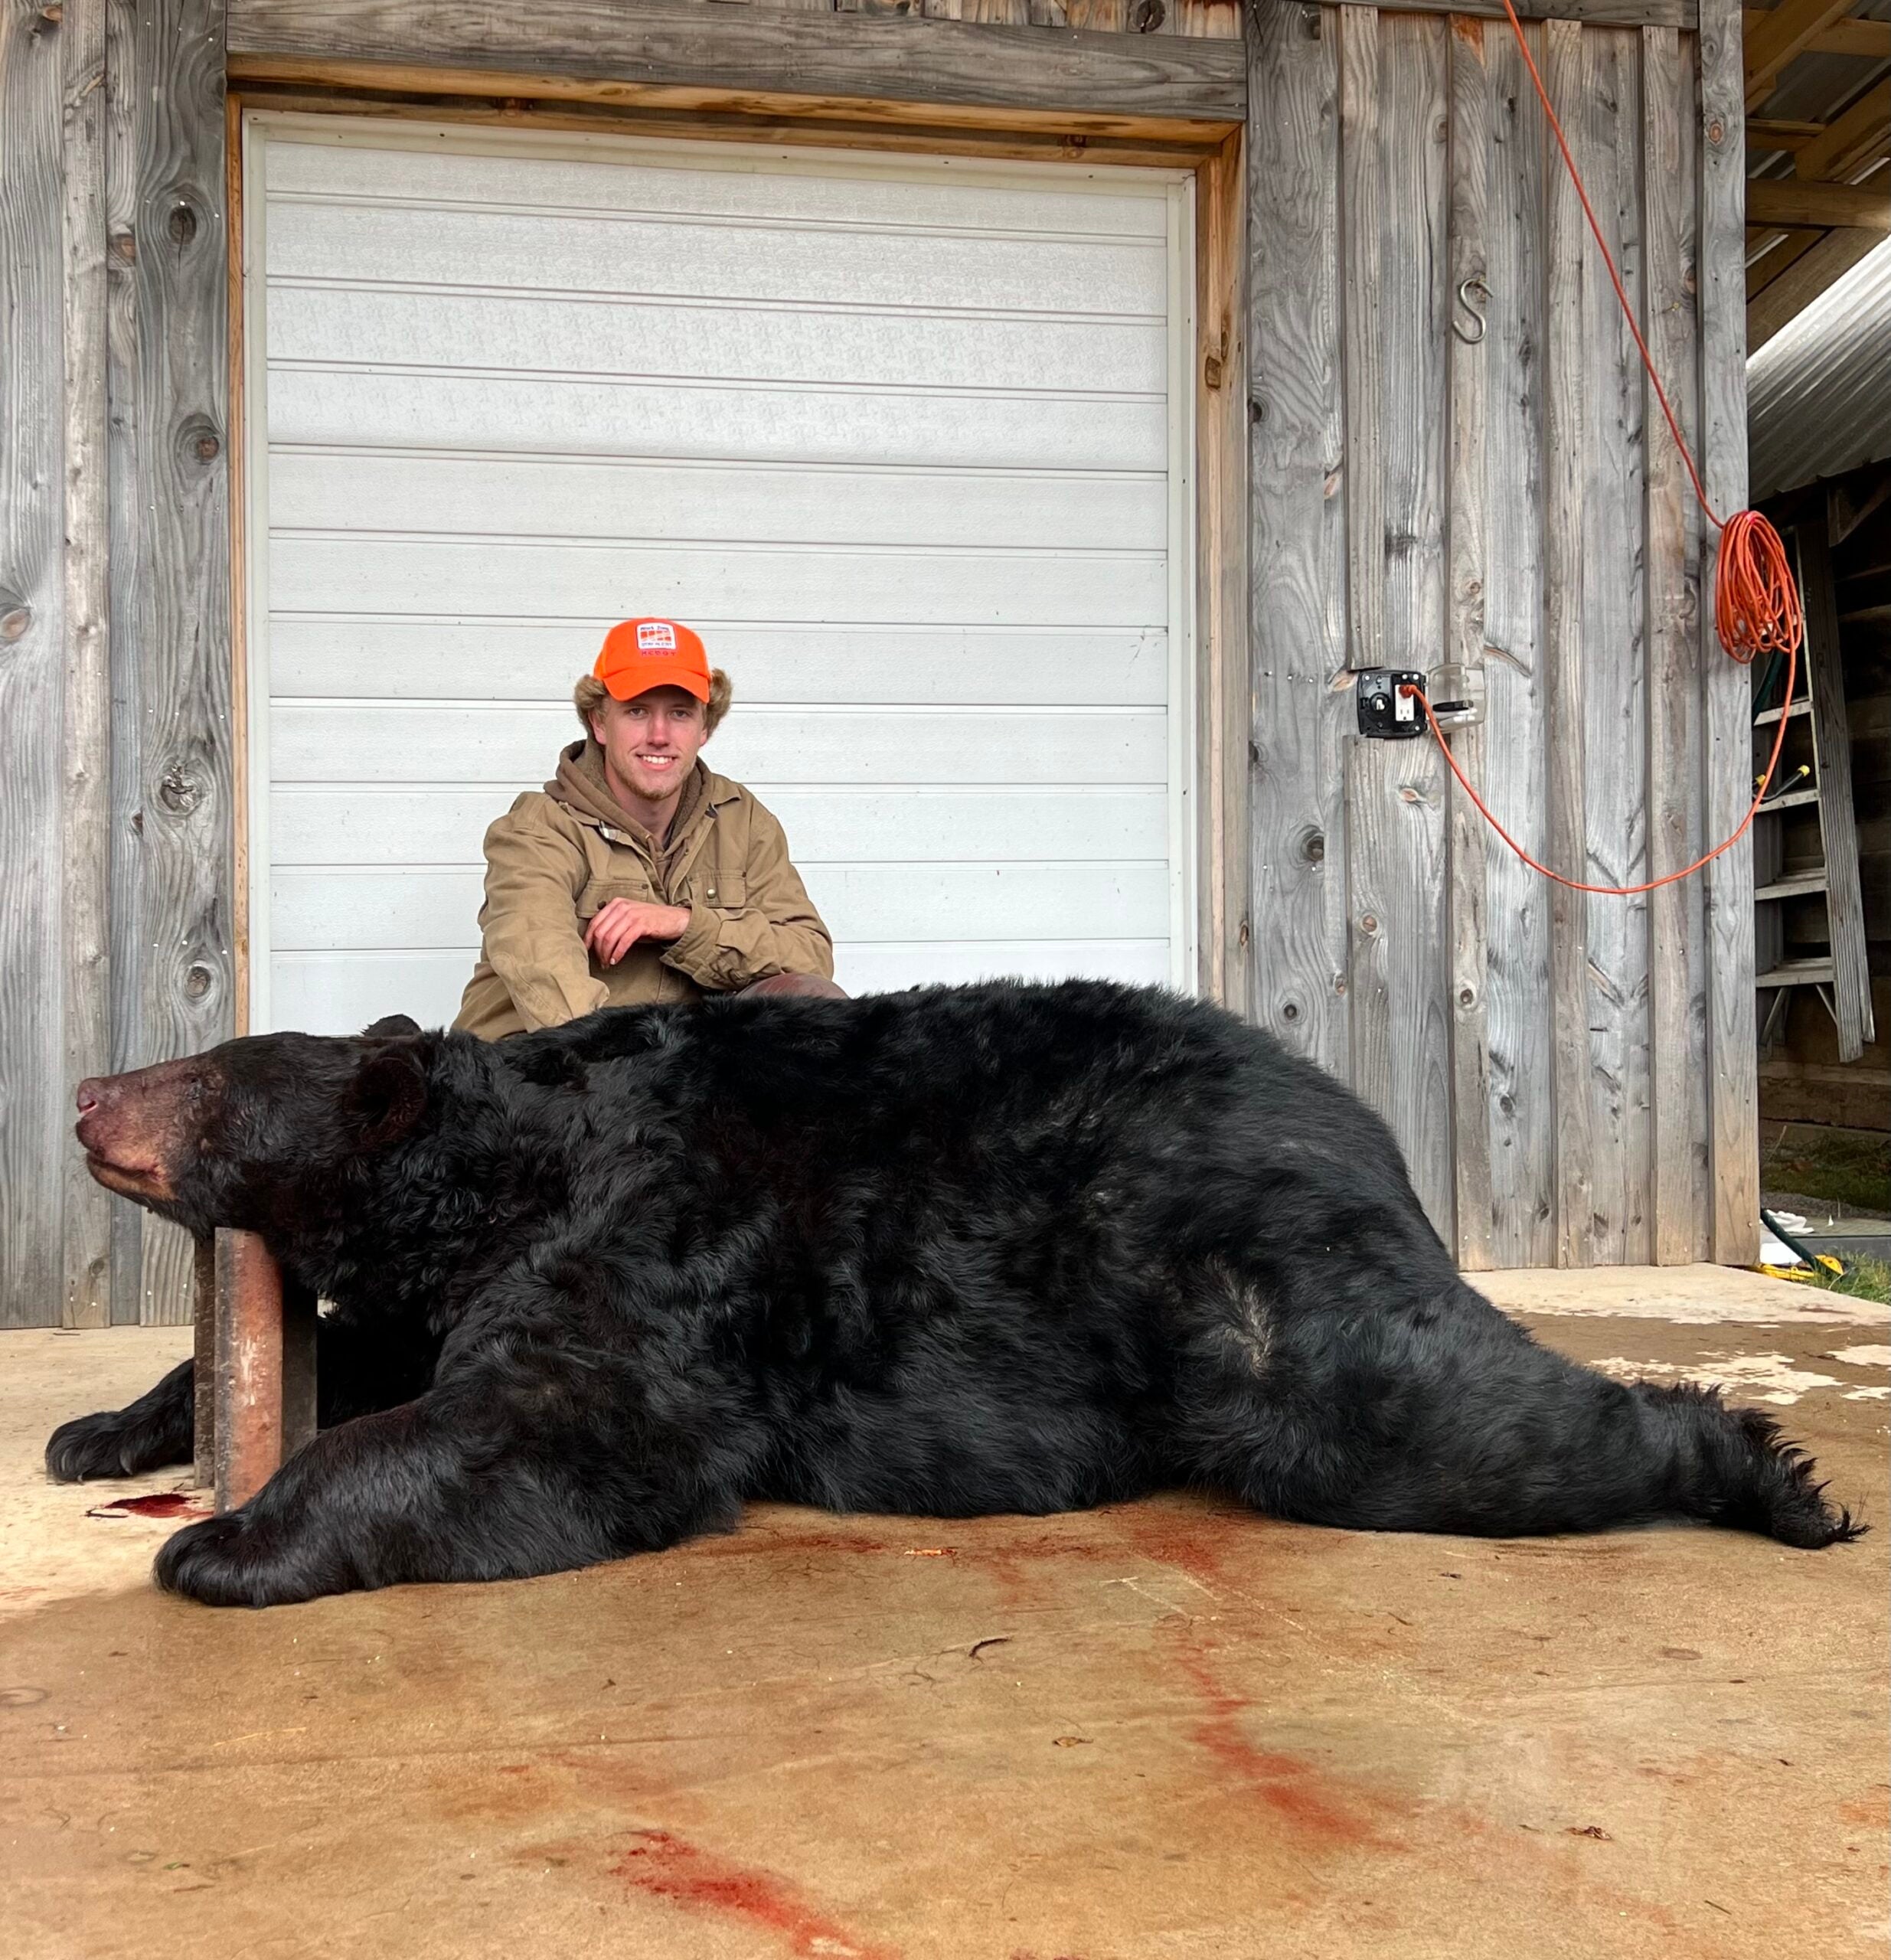 the hunter poses with the big black bear